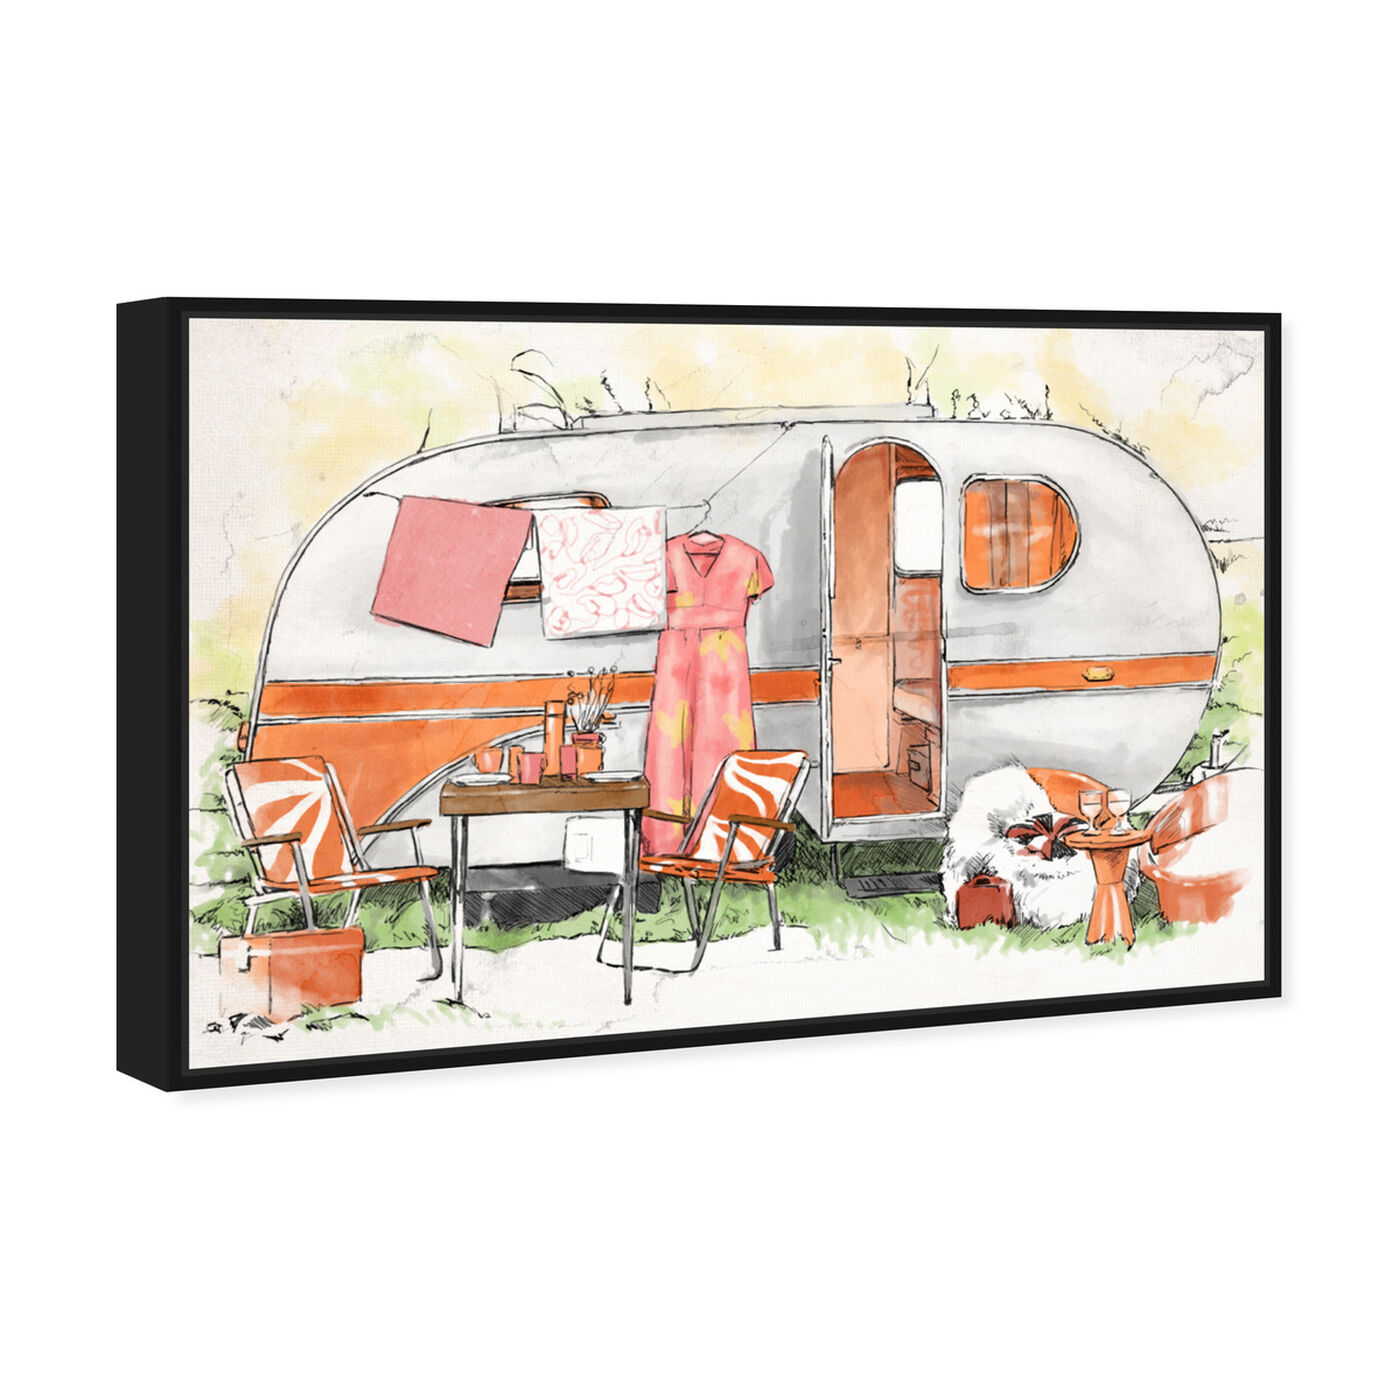 Angled view of Orange Camper featuring transportation and trucks and busses art.